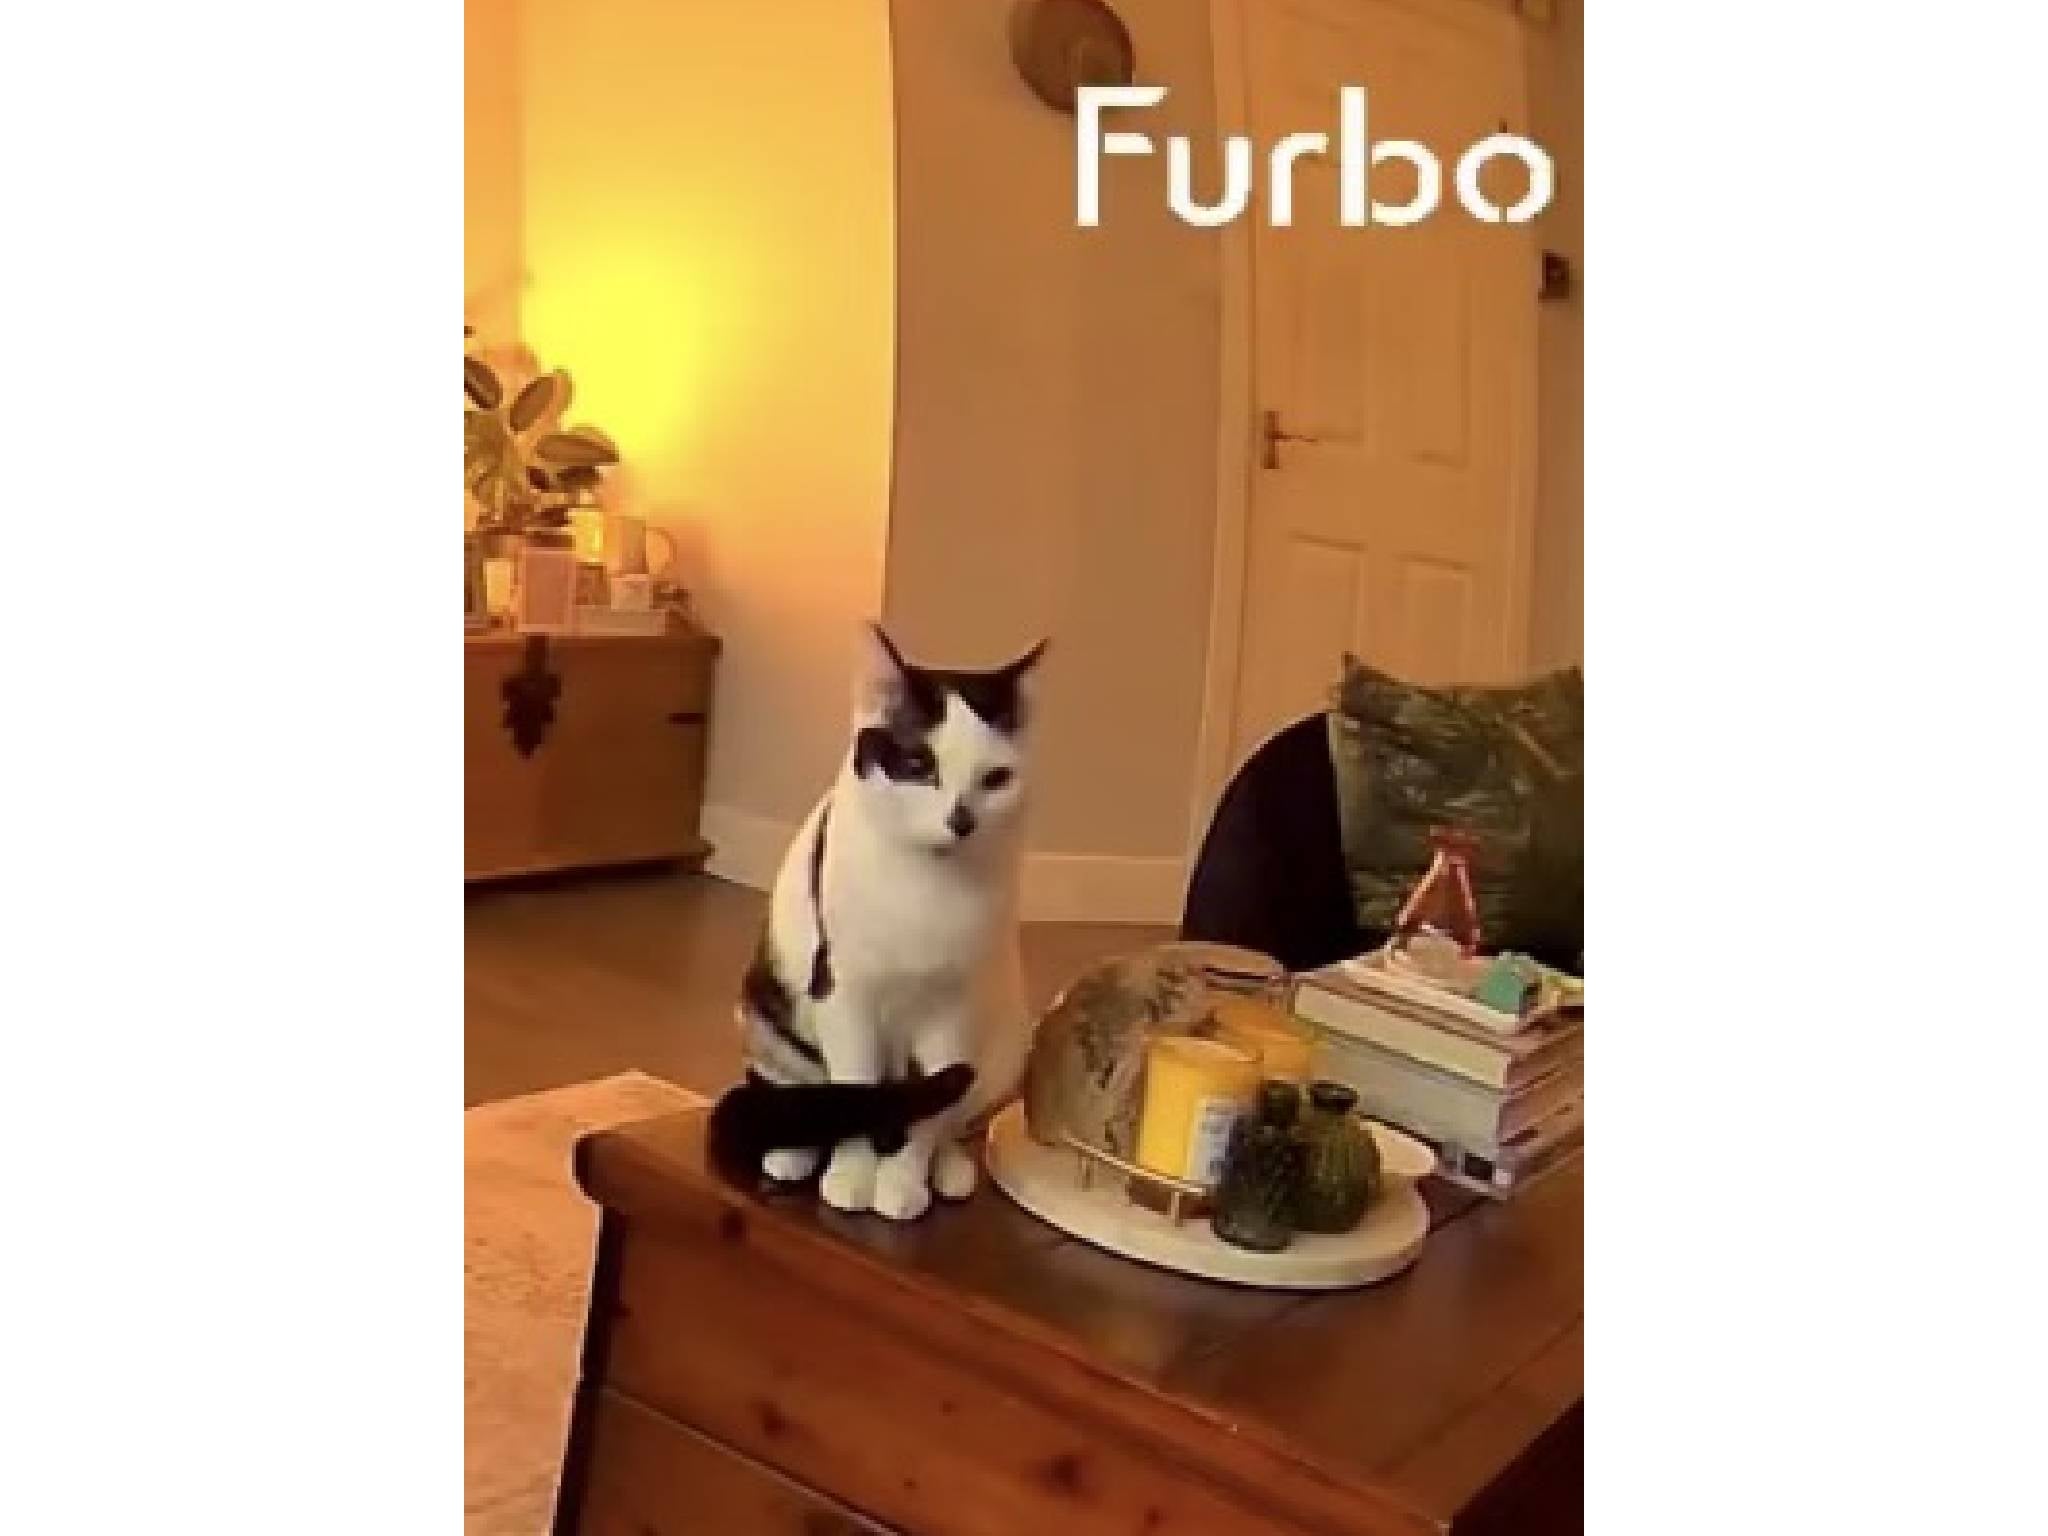 I could watch my cat Star from afar by using the Furbo app